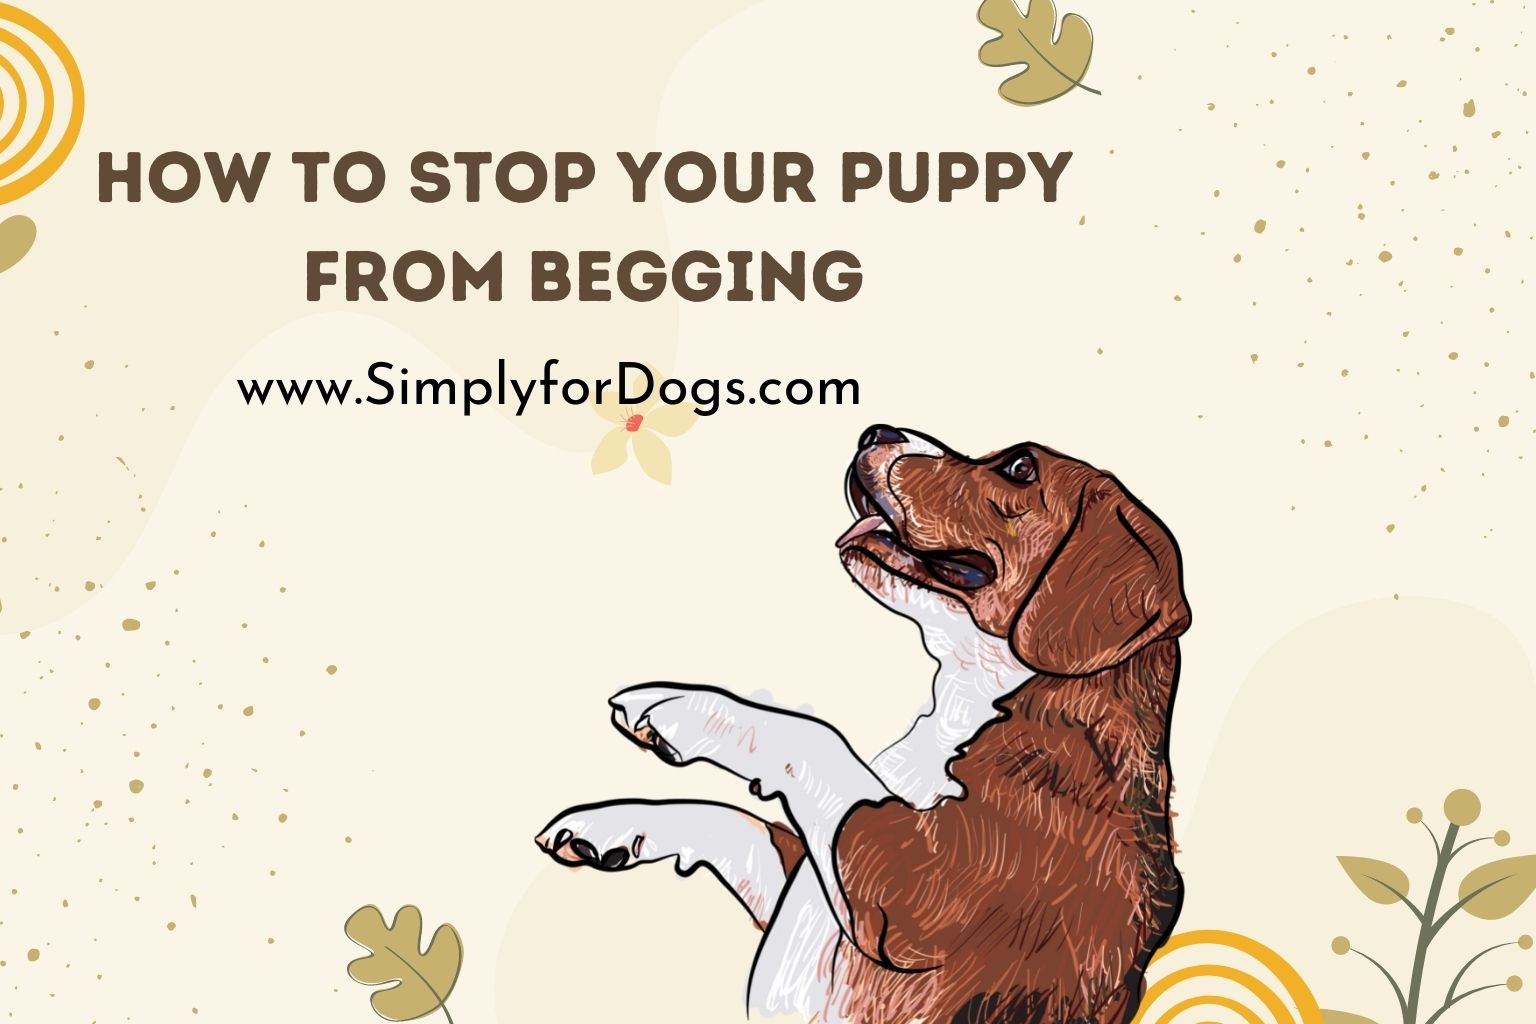 How to Stop Your Puppy from Begging